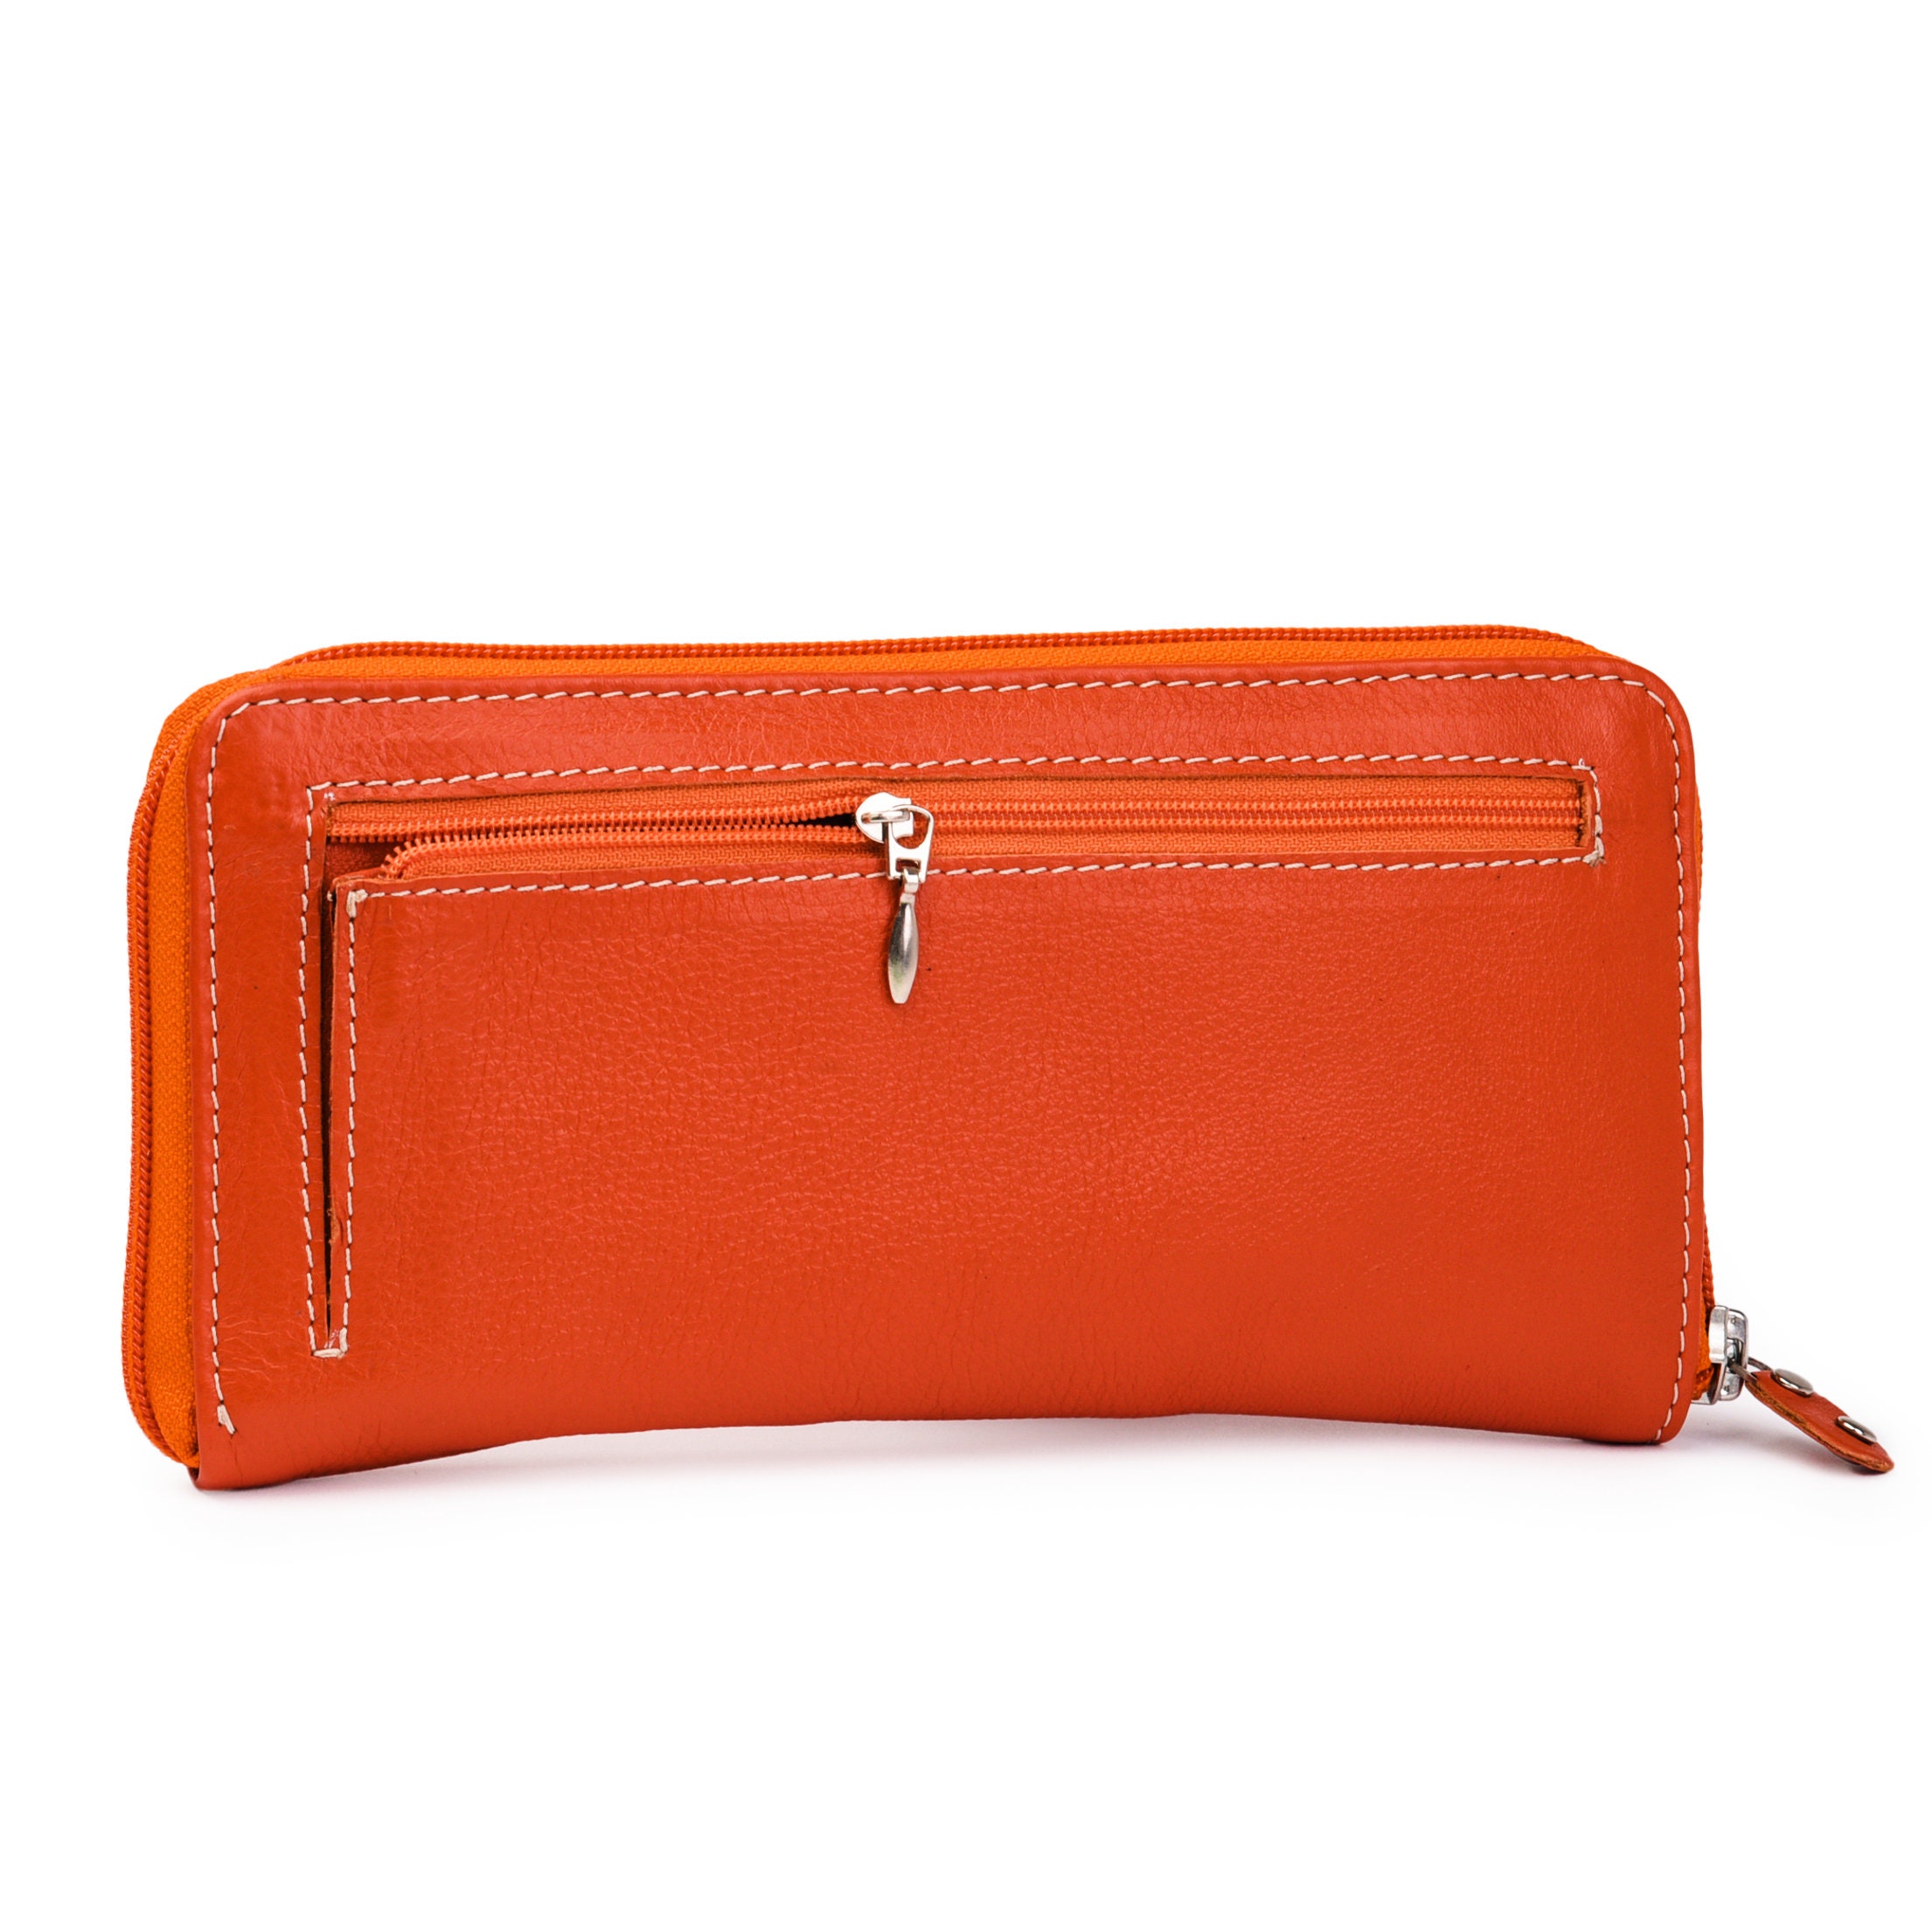 Hermès - Authenticated Wallet - Leather Orange Plain for Women, Very Good Condition